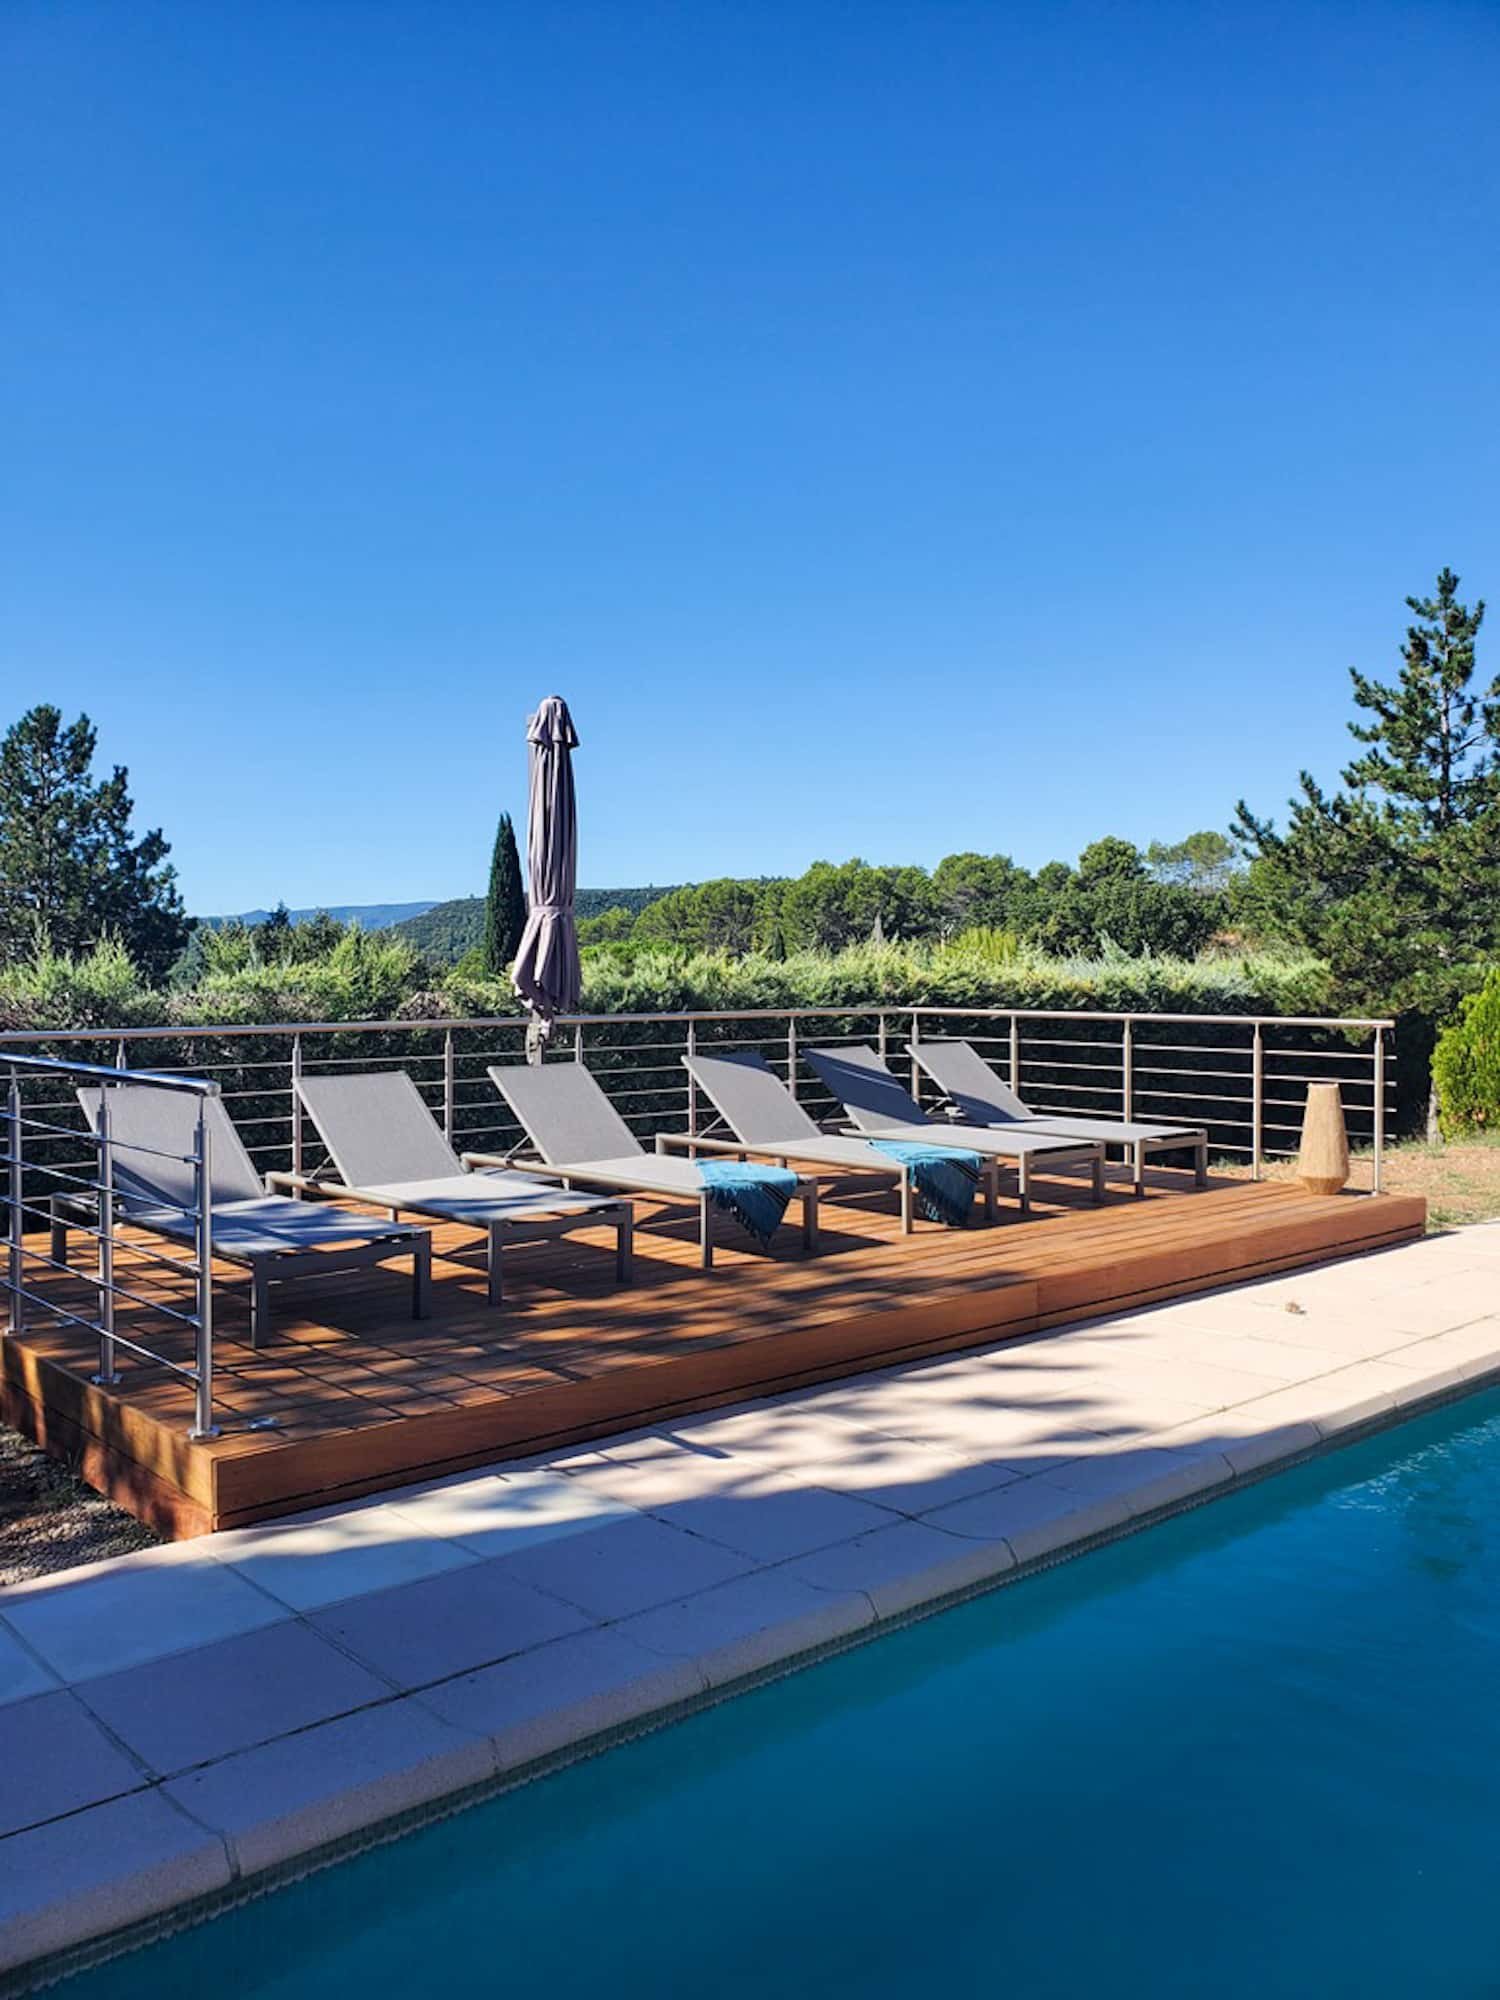 Terrace at the foot of the pool with its sunbeds, by Christiansen Design, Interior designer in Yvelines and Decorator in Paris, Hauts de Seine, Provence